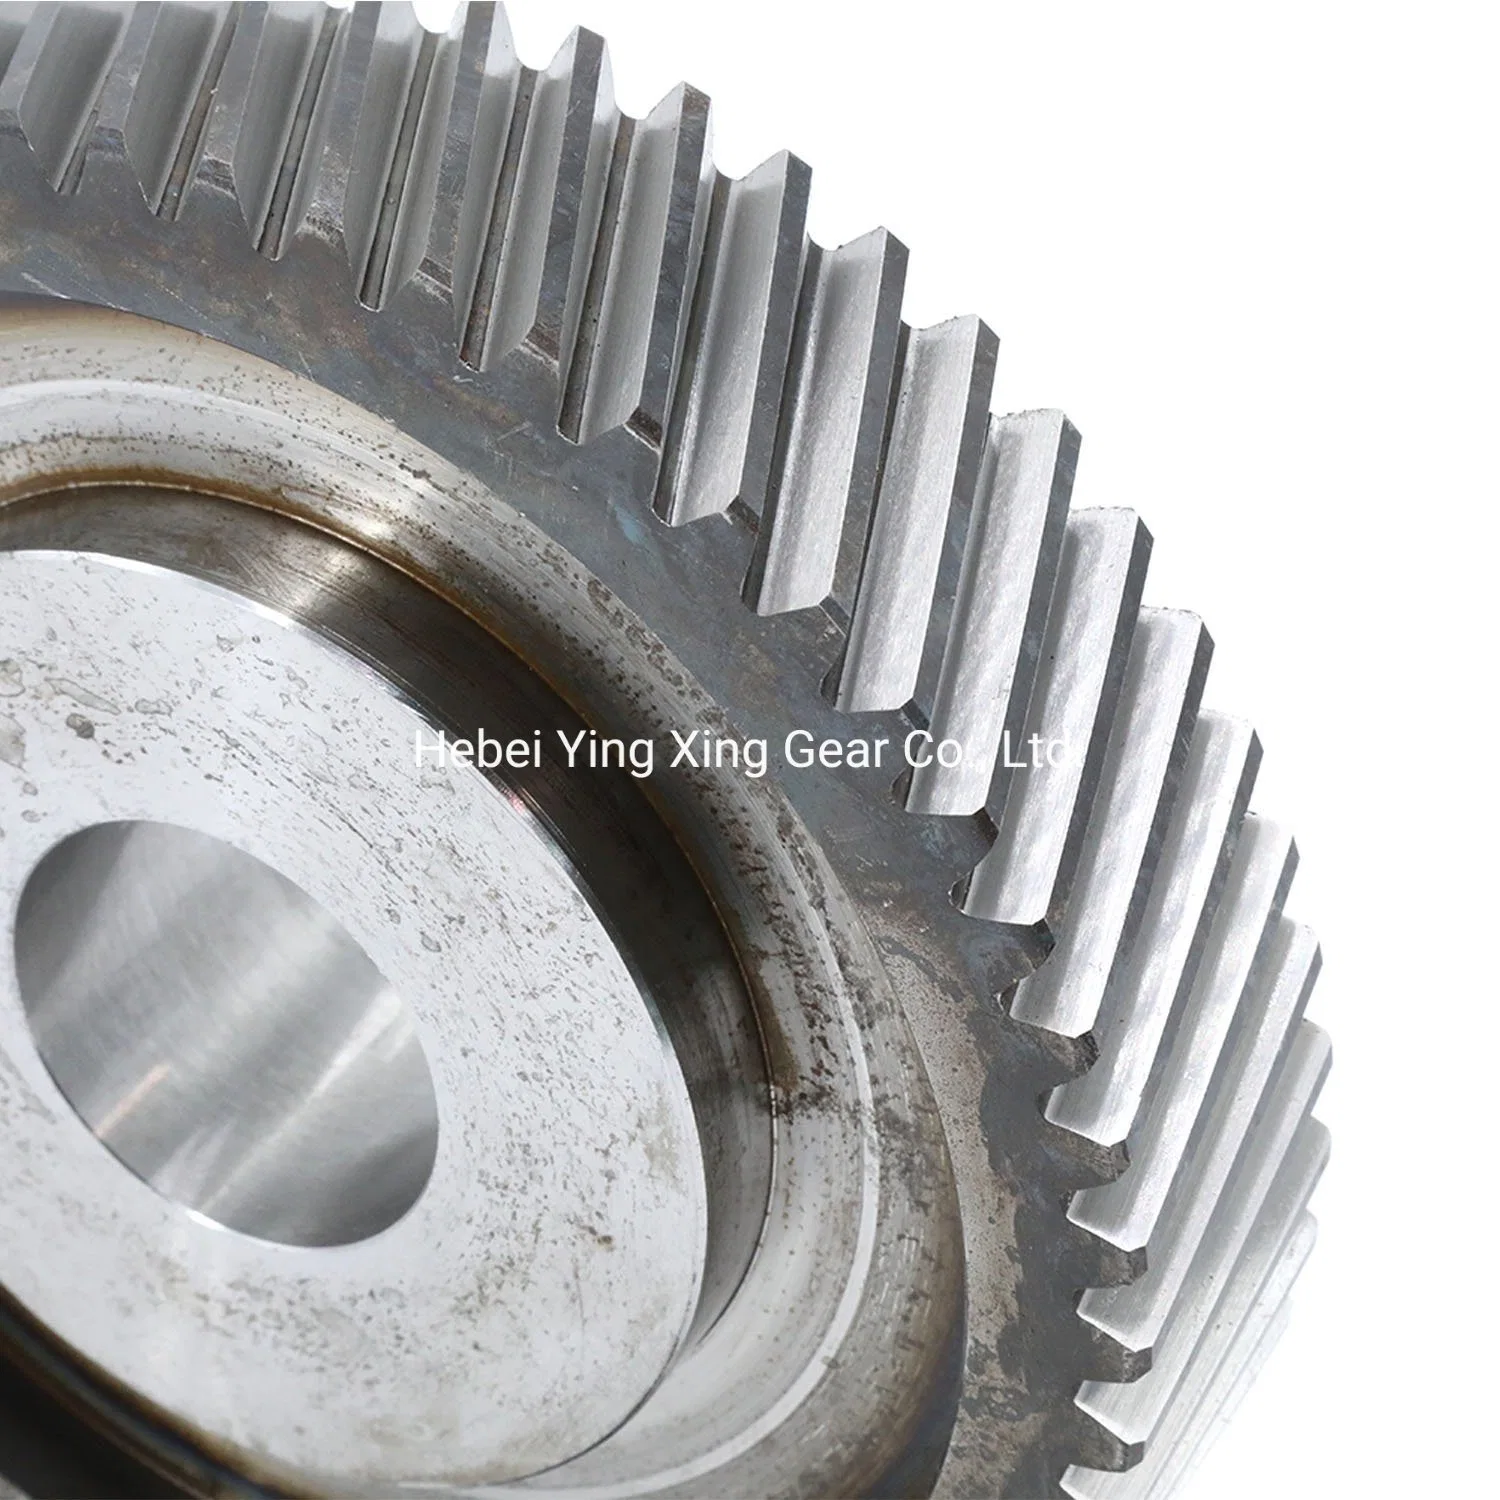 Gear Module 3.5 and 55 Teeth Customized Helical for Reducer/ Drilling Machine and Oil Machinery